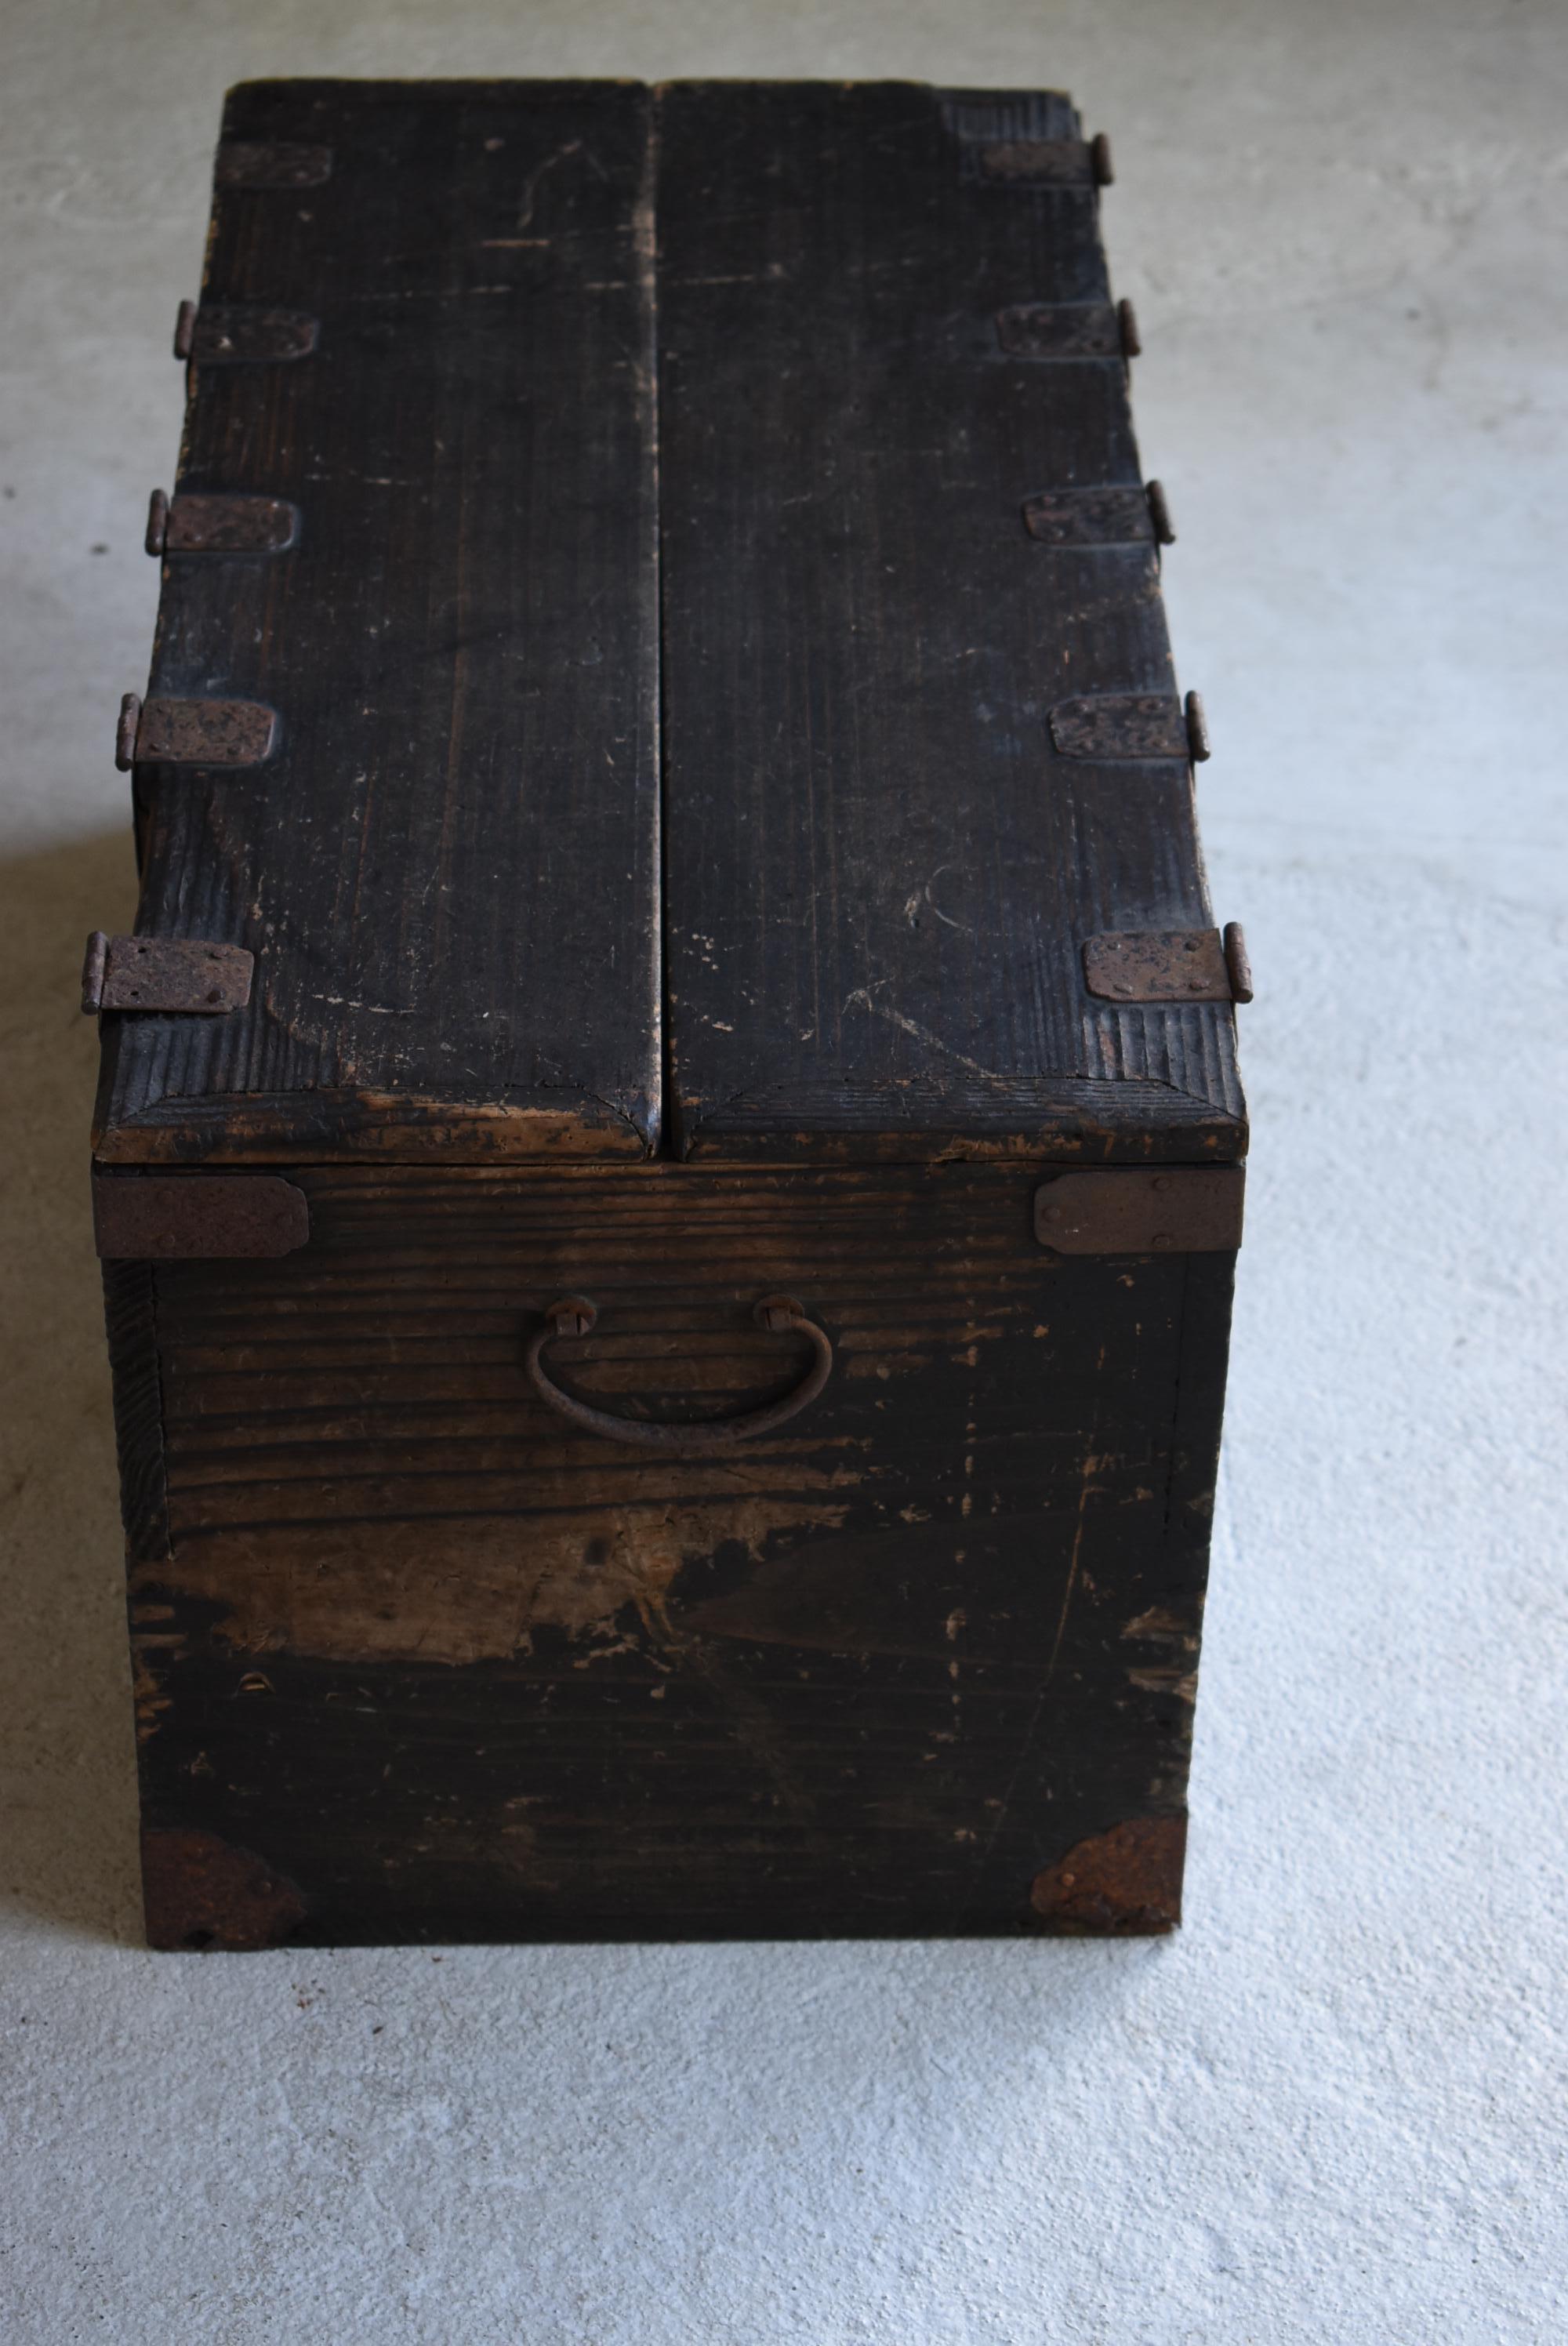 It is an old Japanese wooden box.
It is an item from the Meiji era. (1860s-1920s)
The material is cedar.

It is a very rare type of box with double doors.
The arrangement of the hinges is also beautiful.

The inside of the box is clean and in